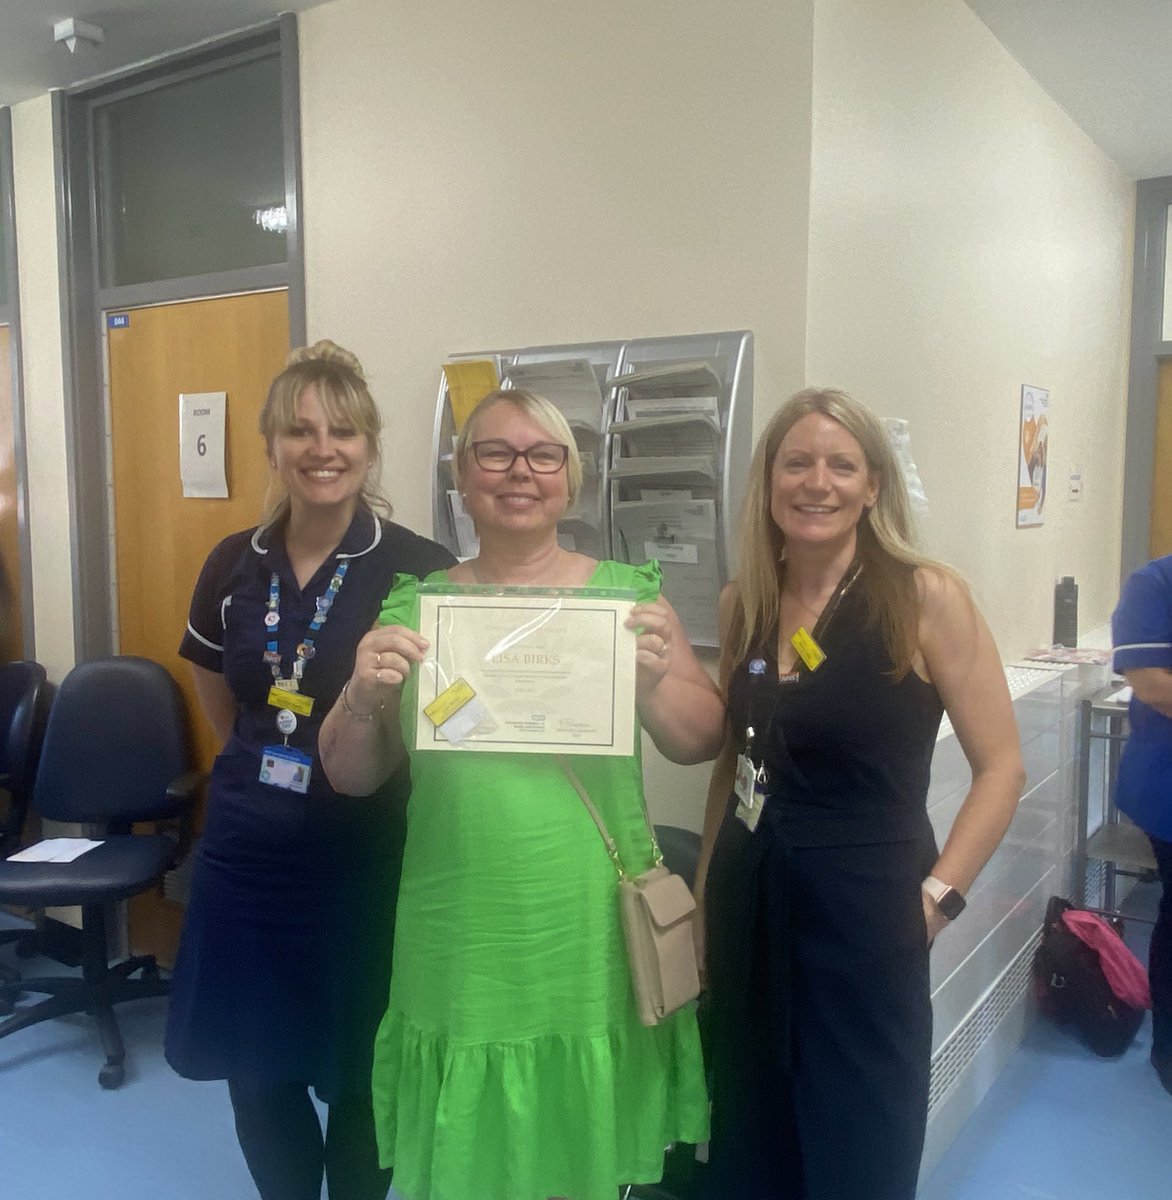 Community outpatient Clinical Support Workers receiving their certificates for completing their competencies in multi-speciality outpatients @NatalieBarx @JulieTuckwood @DzanajahicDzana @UHDBTrust